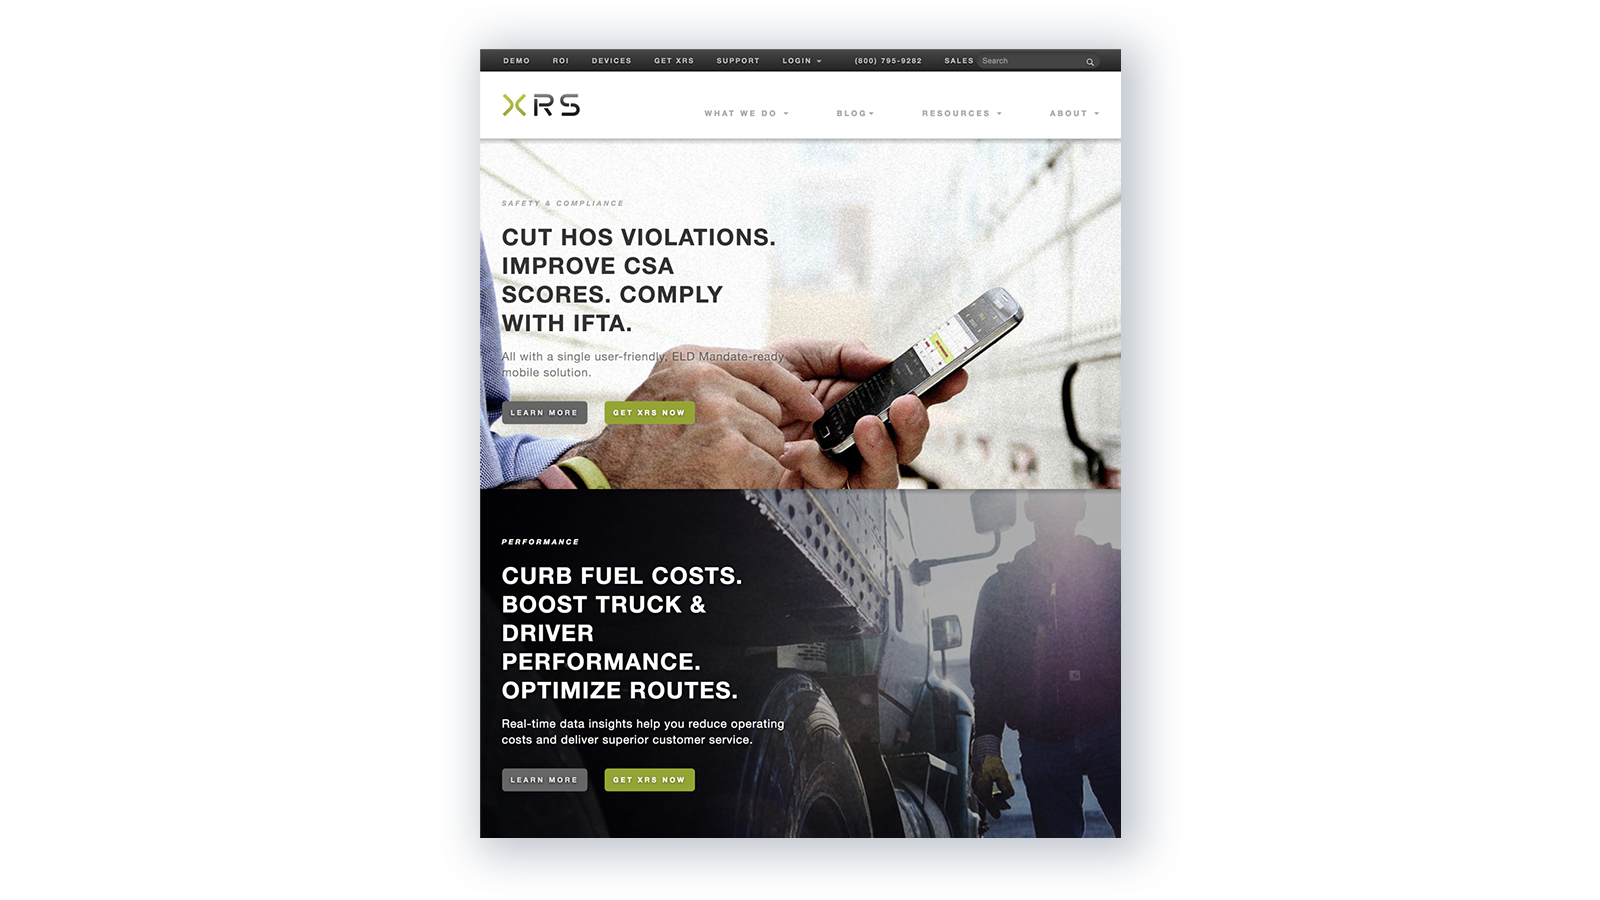 XRS homepage highlights solution benefits: Reducing HOS violations, improving CSA scores, complying with IFTA, cutting fuel costs, improving driver safety, and optimizing routes.